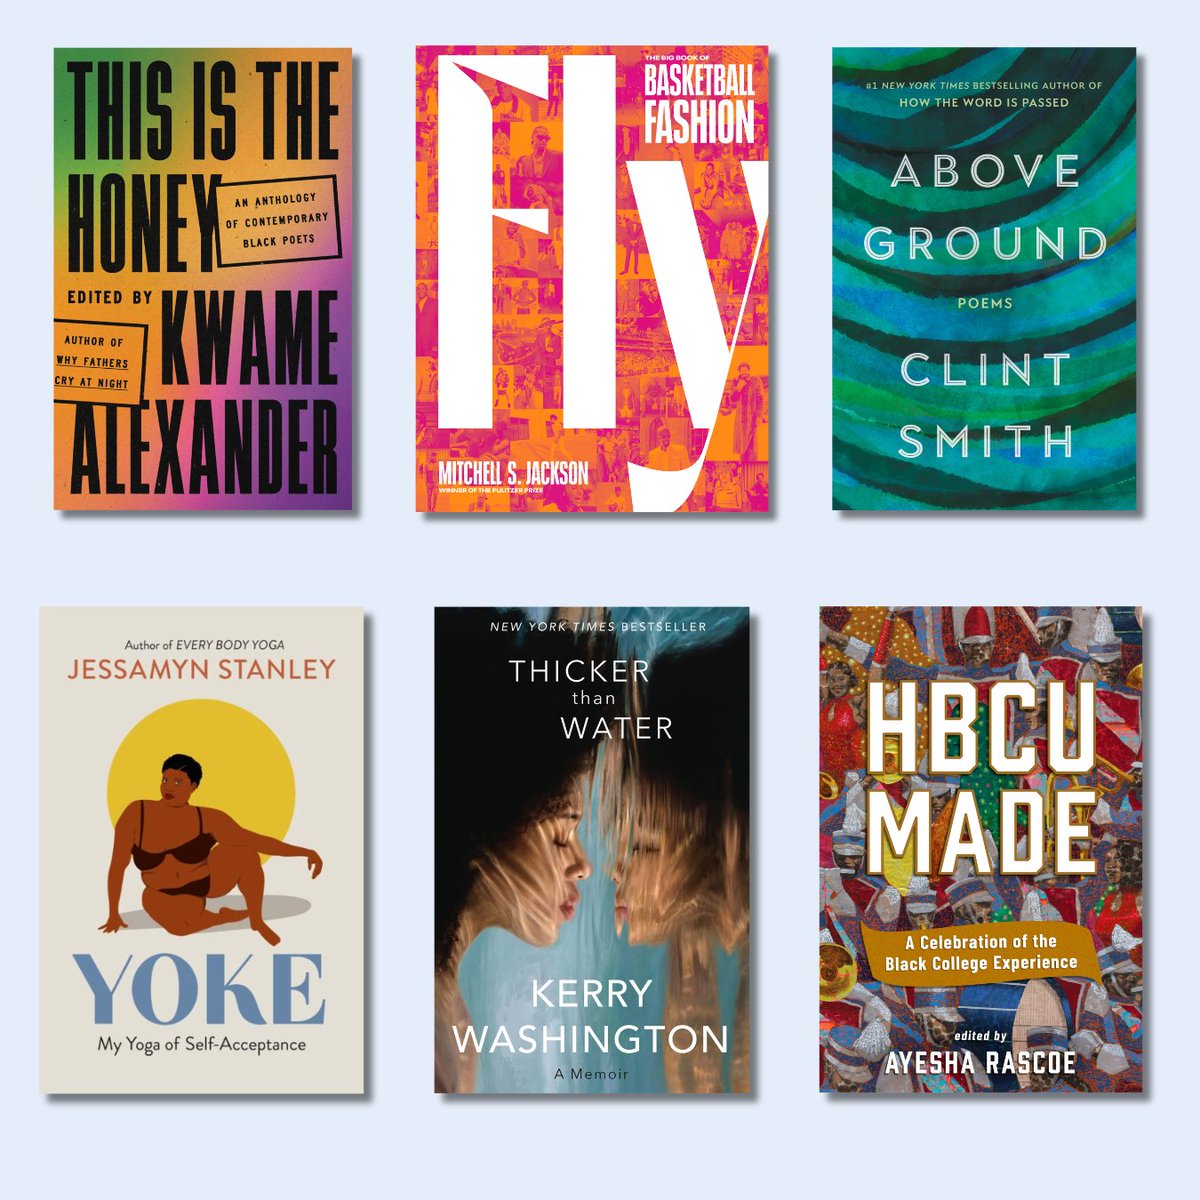 Some books to add to your TBR this Black History Month and beyond! Visit hachettebookgroup.com/landing-page/b… to explore these books and more great #reads.